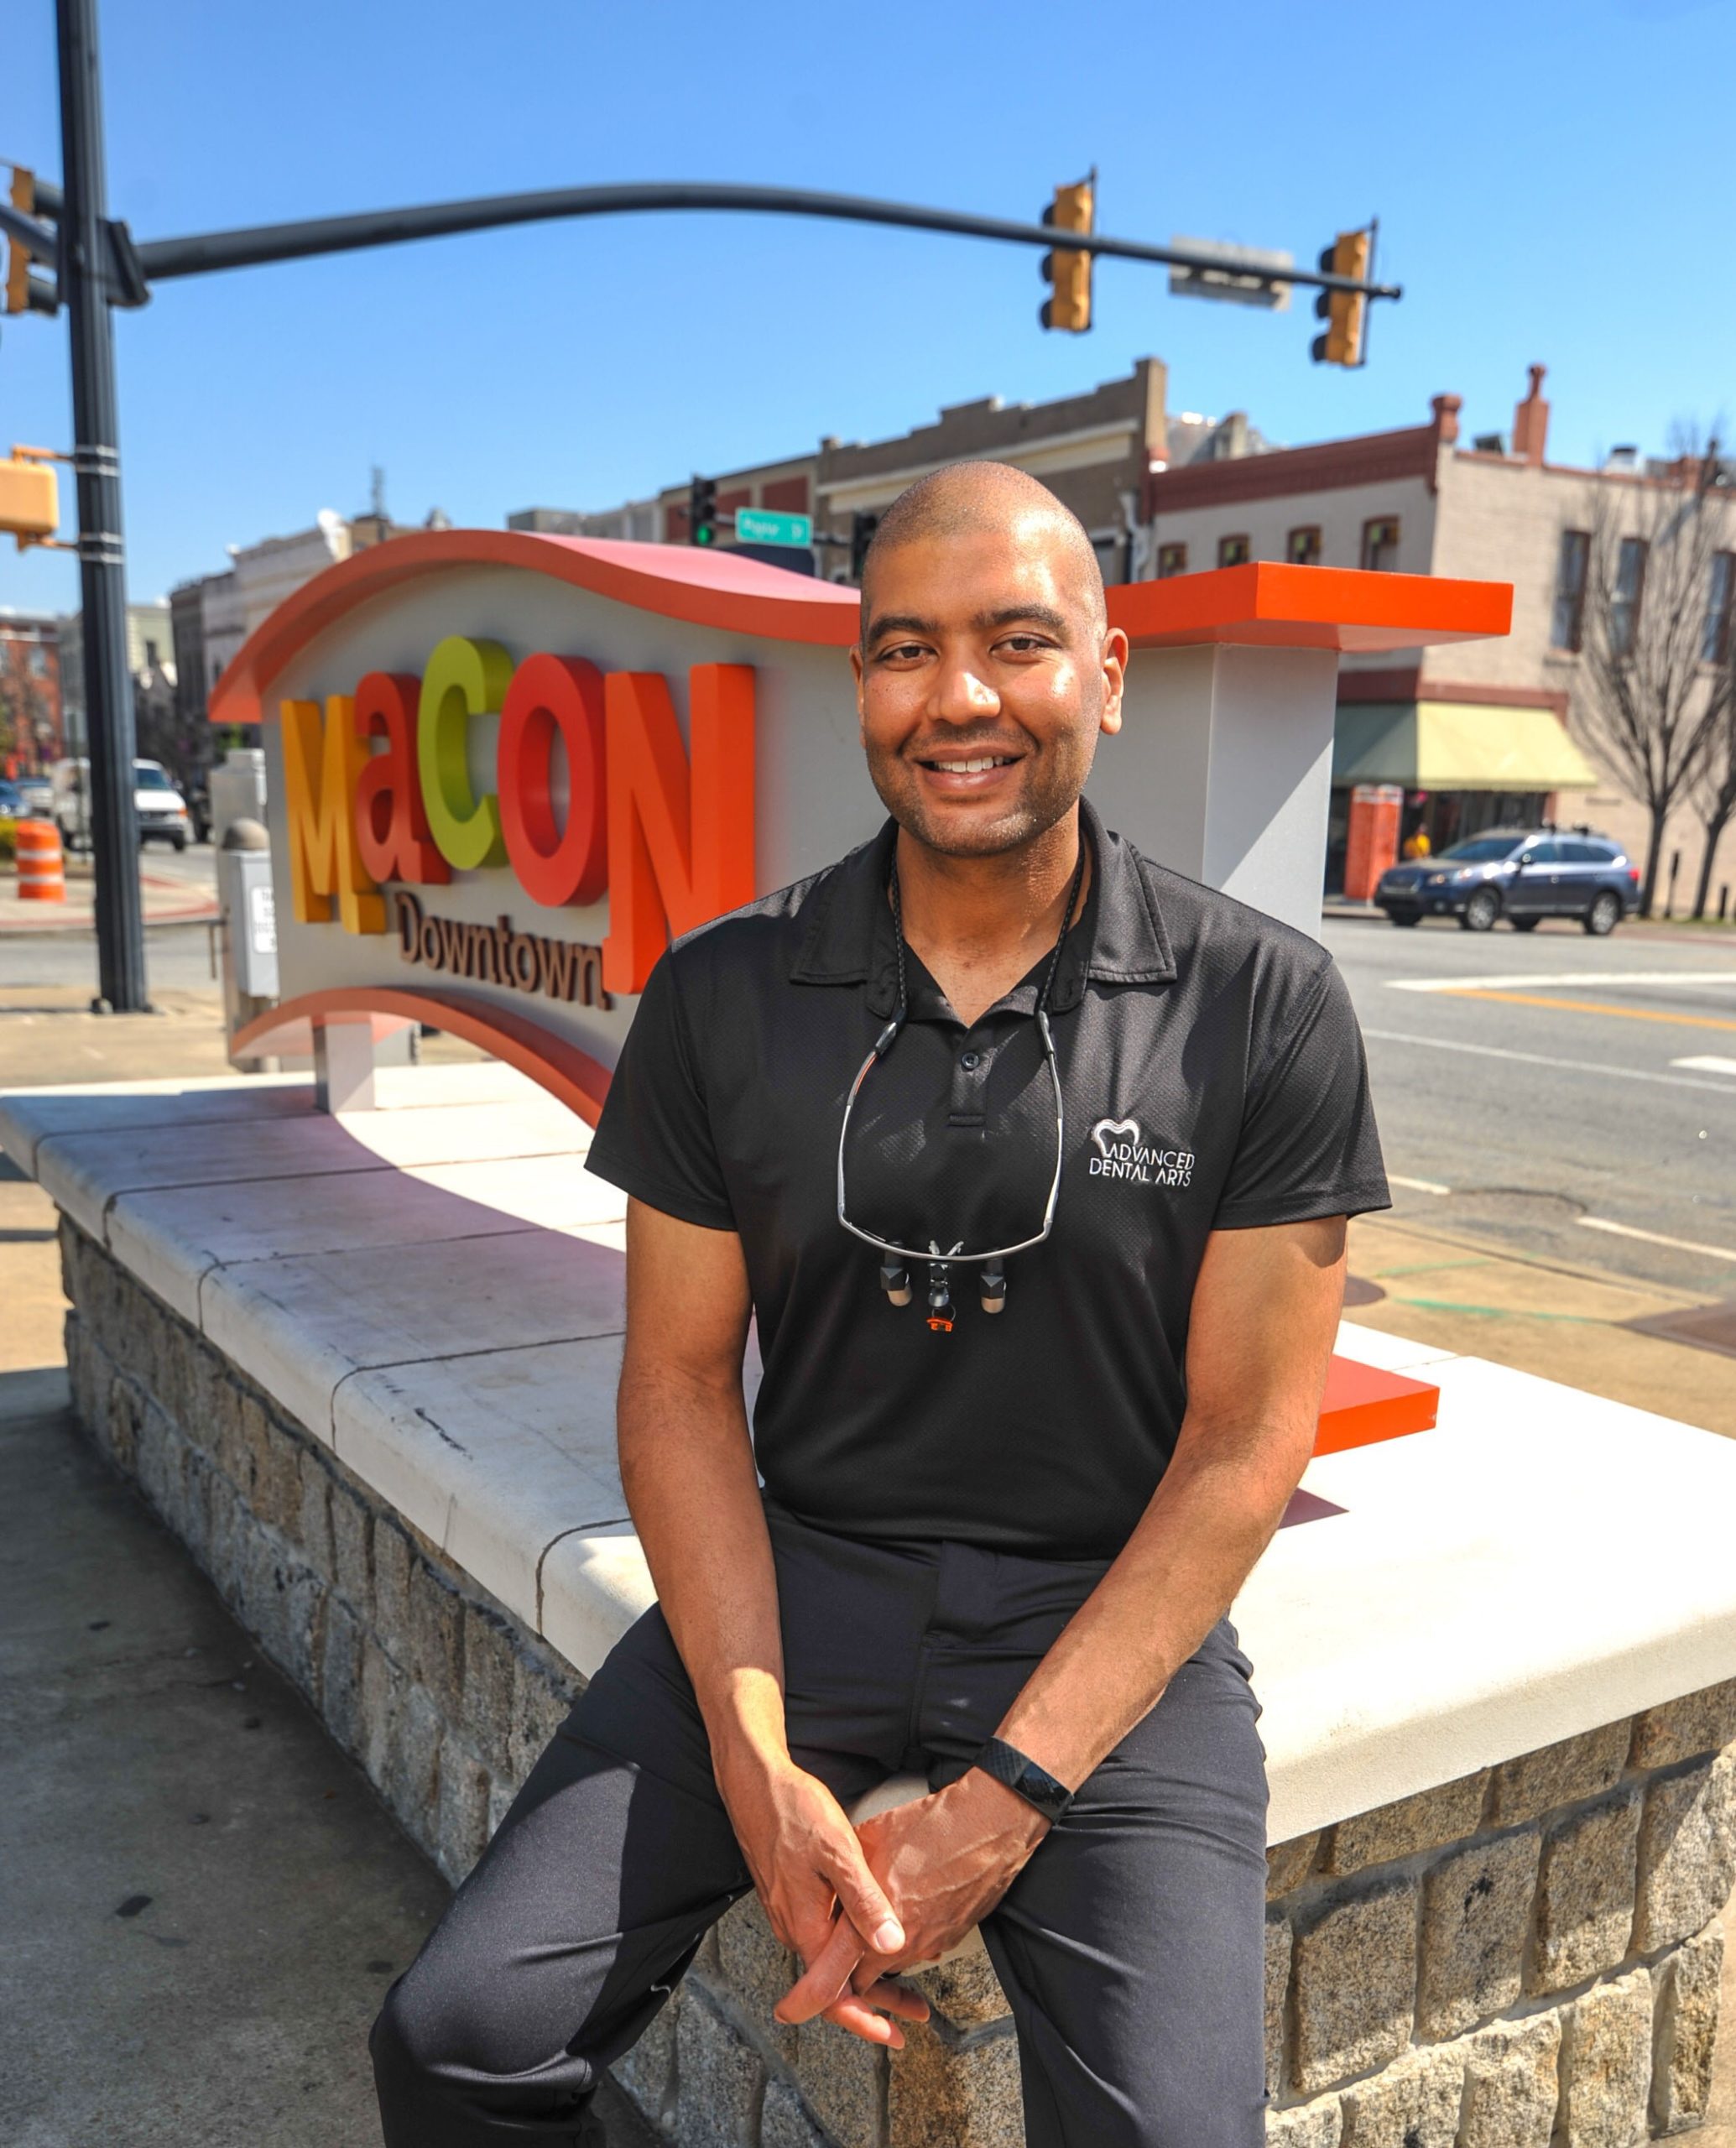 Dr. Samer Othman is shown in from of the Macon sign in downtown Macon.